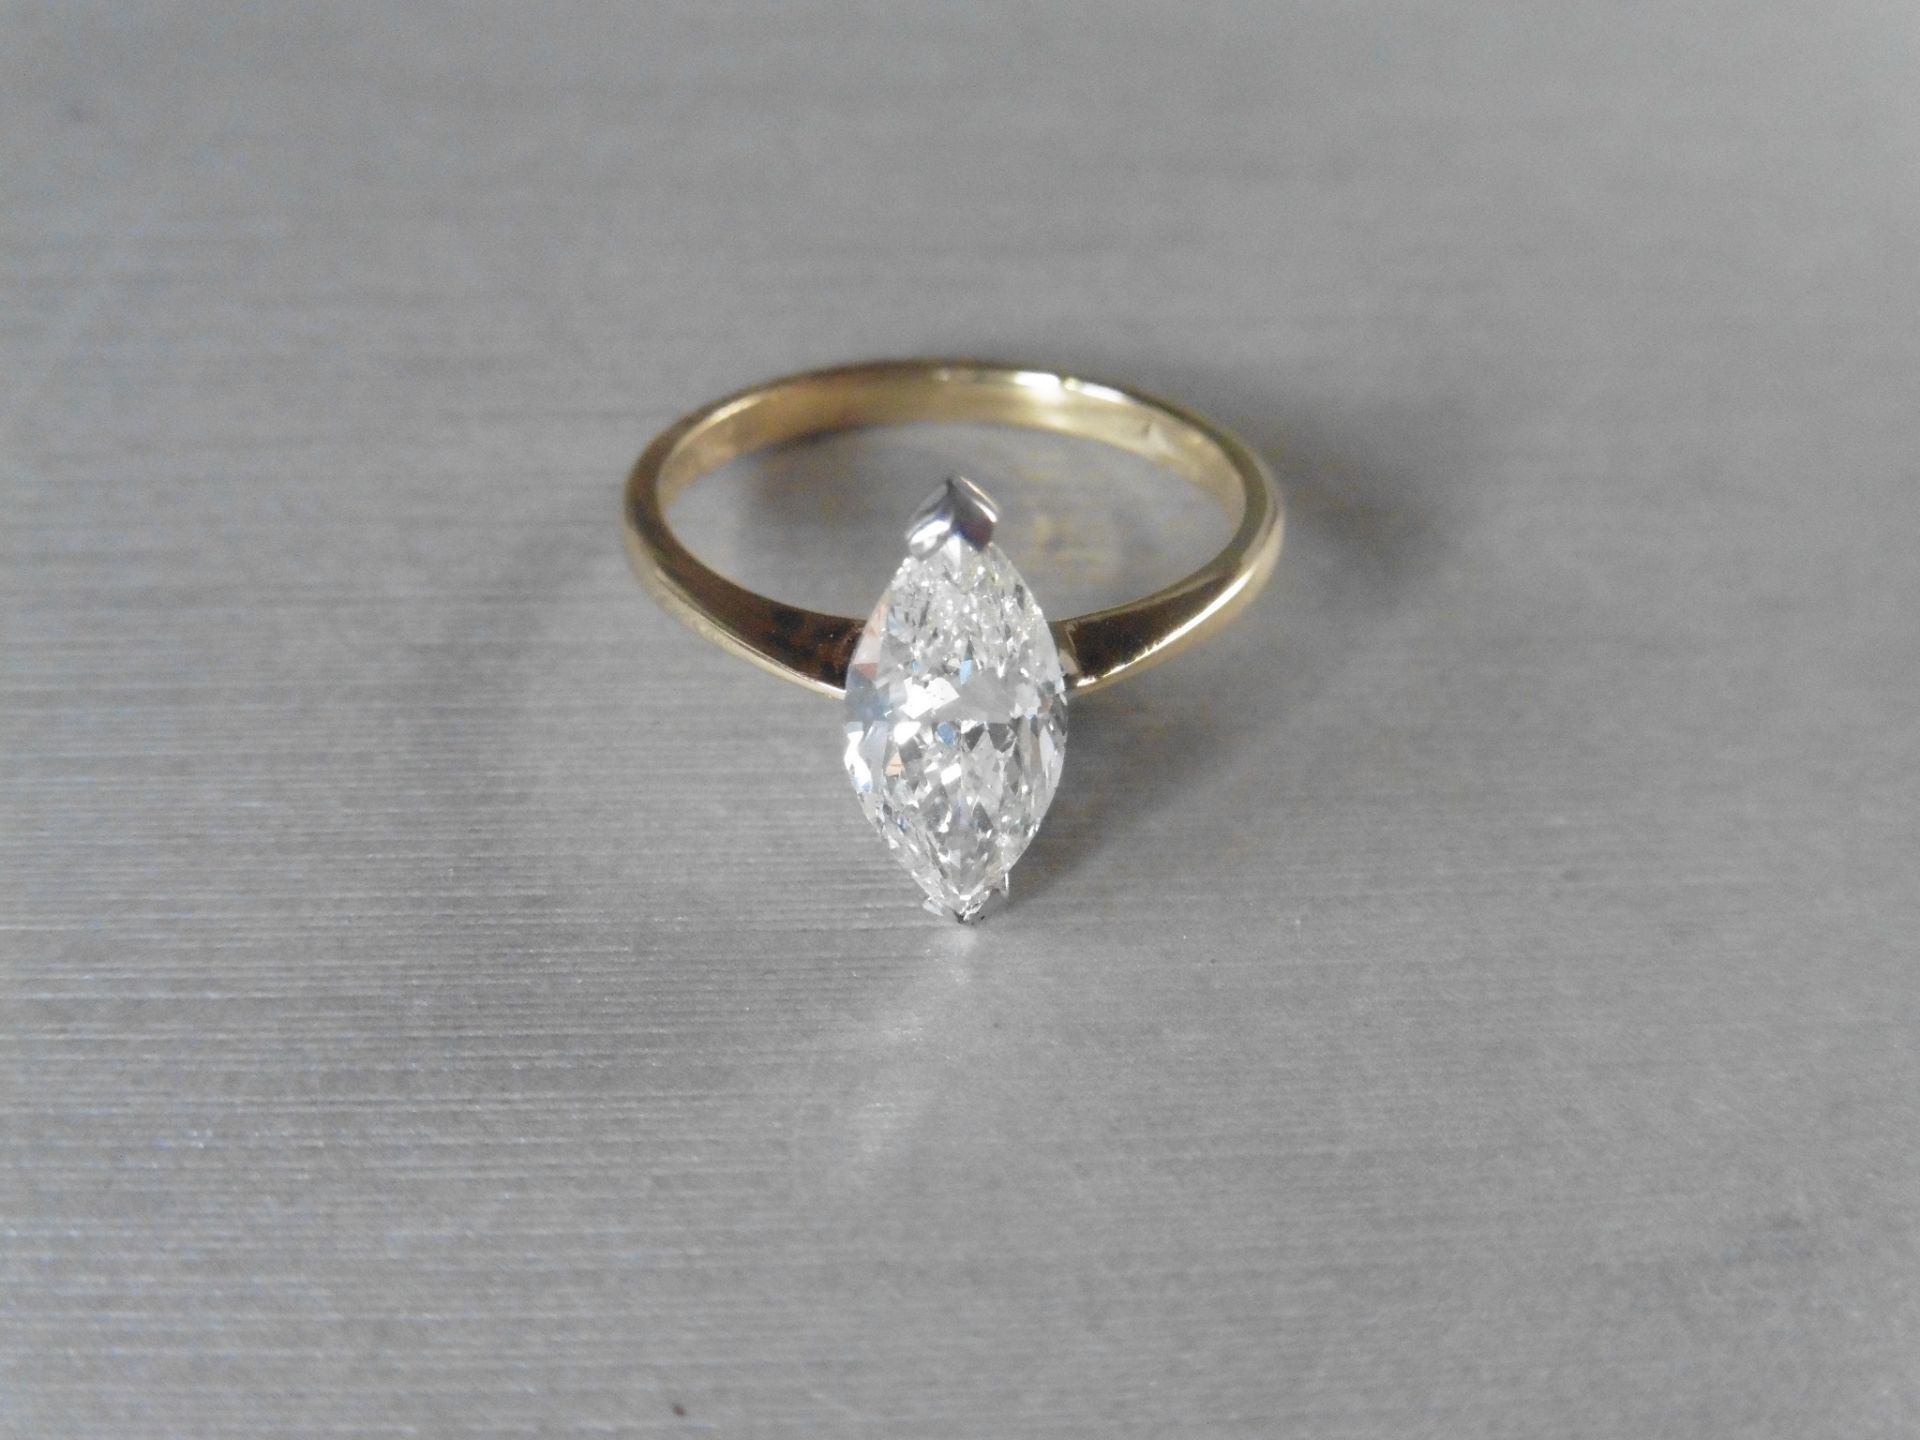 1.51ct marquise cut diamond ring. H colour and Si2 clarity. Secured in a 2 claw white gold setting - Image 4 of 7